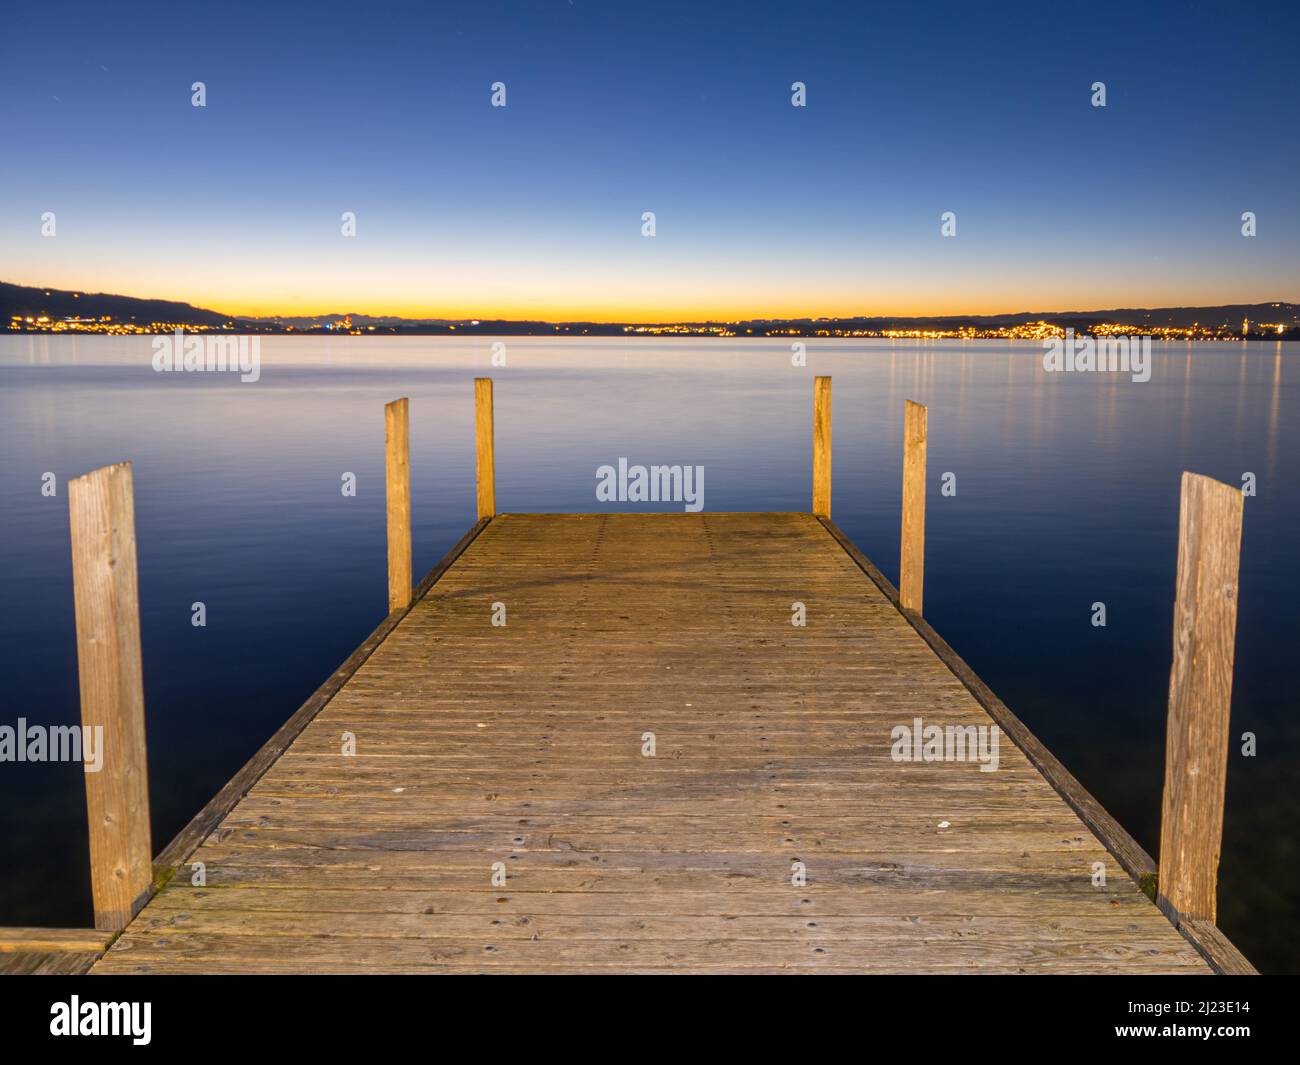 Zug, Switzerland - December 31, 2021: A wooden pier at Lake Zug in Switzerland on winter day after the sunset Stock Photo